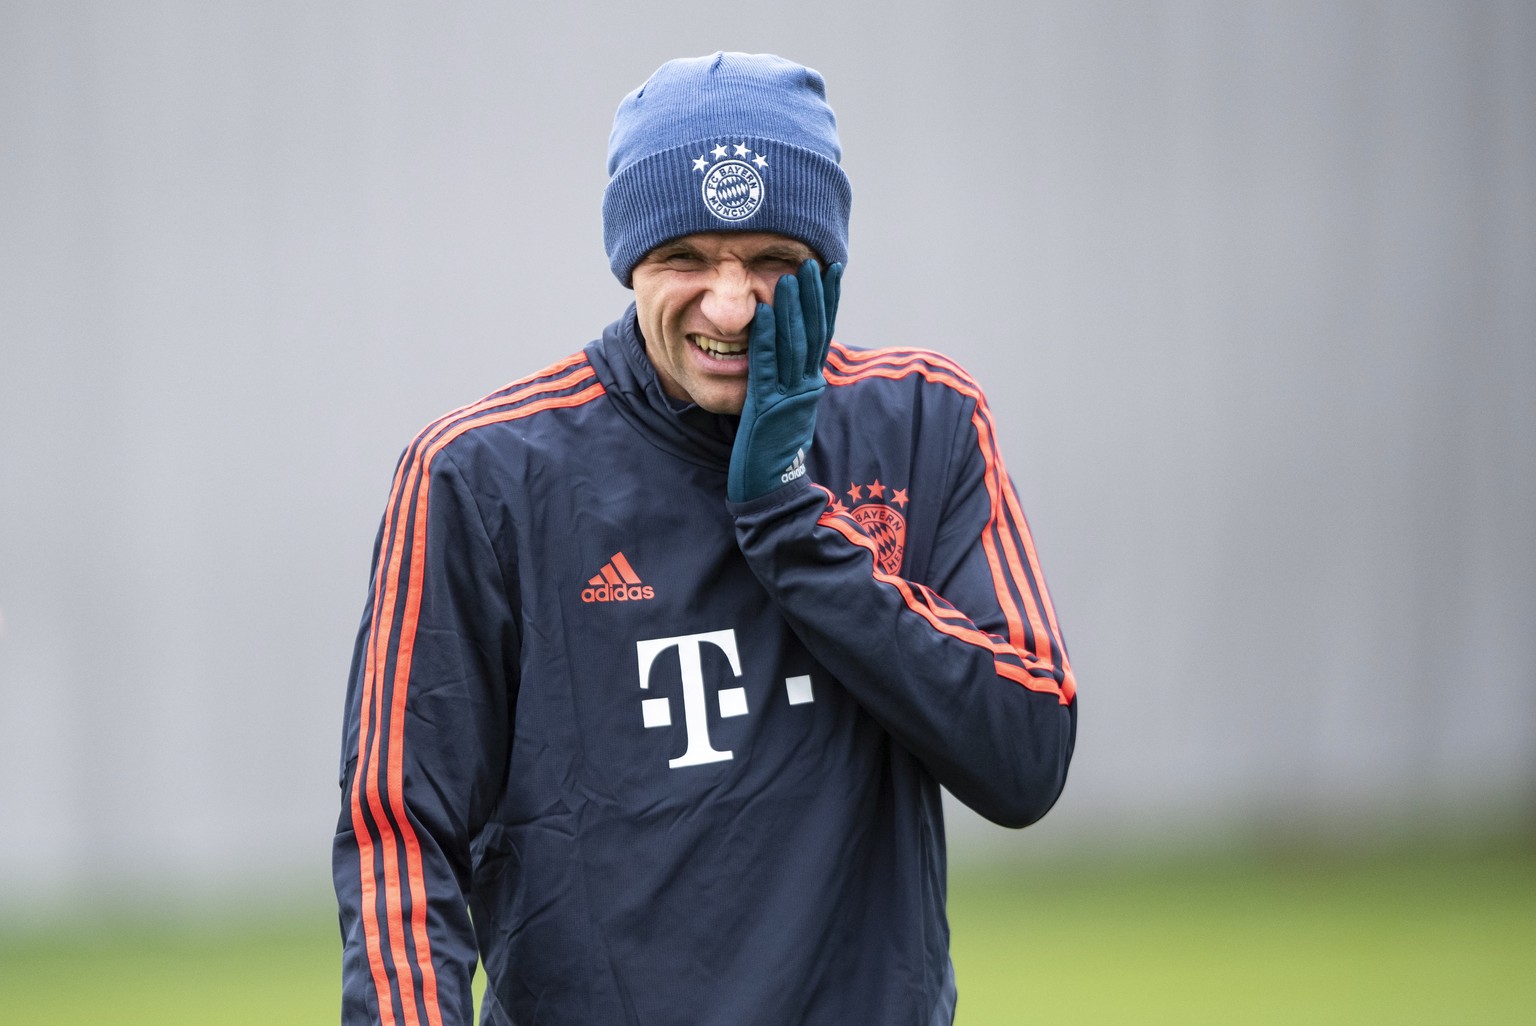 epa07973892 Bayern&#039;s Thomas Mueller reacts during a training session at the Club&#039;s training ground in Munich, Germany, 05 November 2019. Bayern Munich will face Olympiacos Piraeus? in their  ...